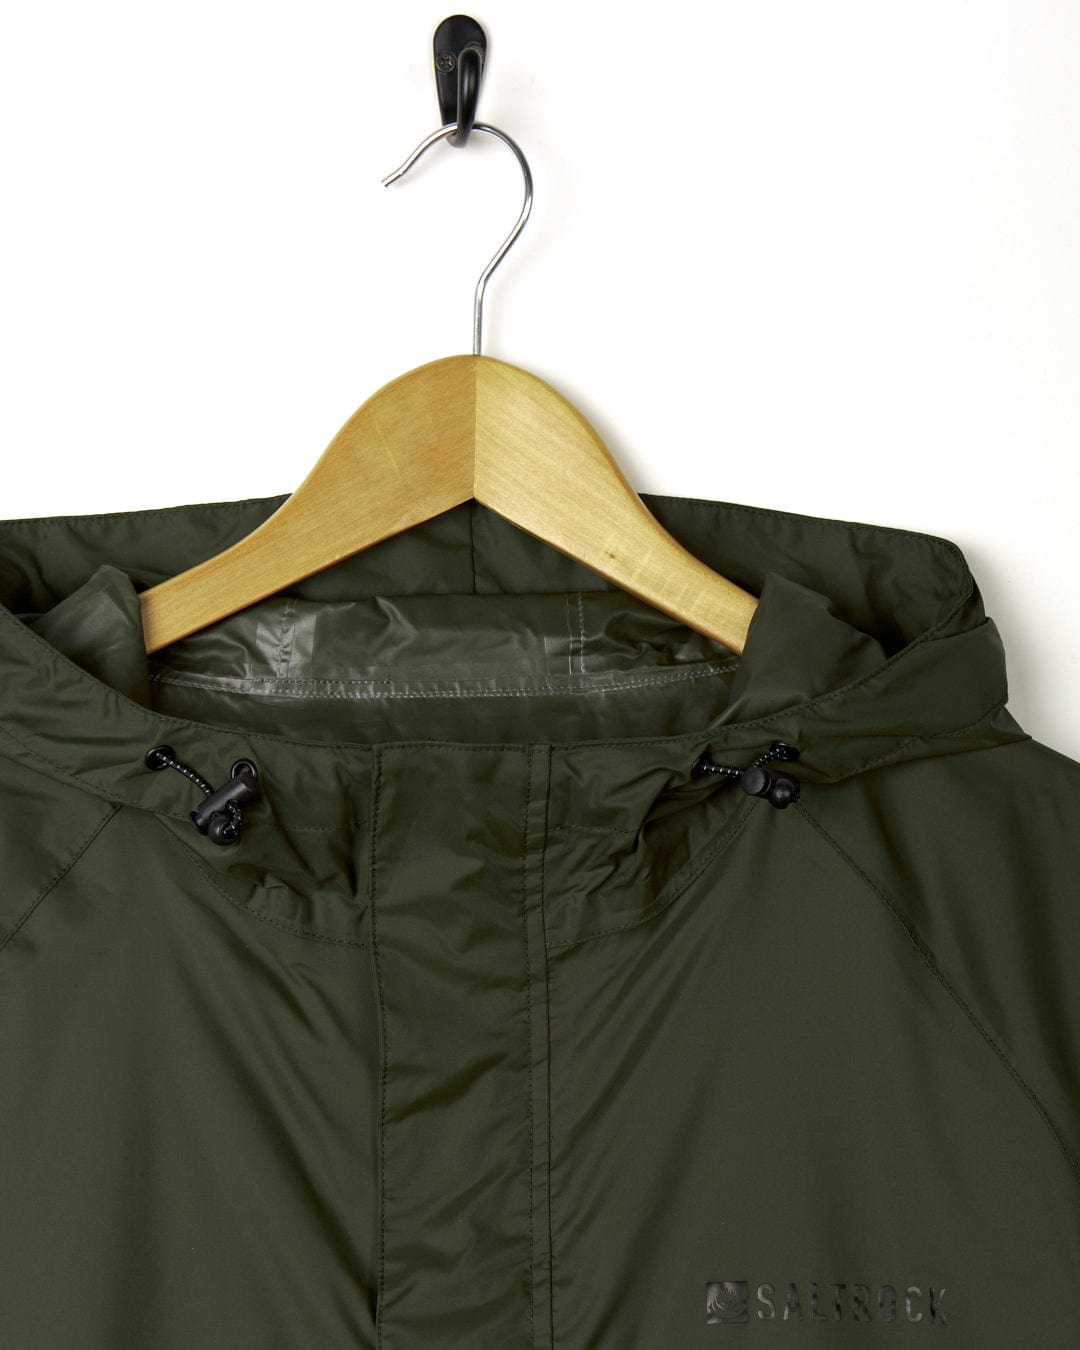 Green Rainier - Mens Packable Waterproof Jacket by Saltrock hanging on a wooden hanger against a white background, detailed view of the collar and upper part.